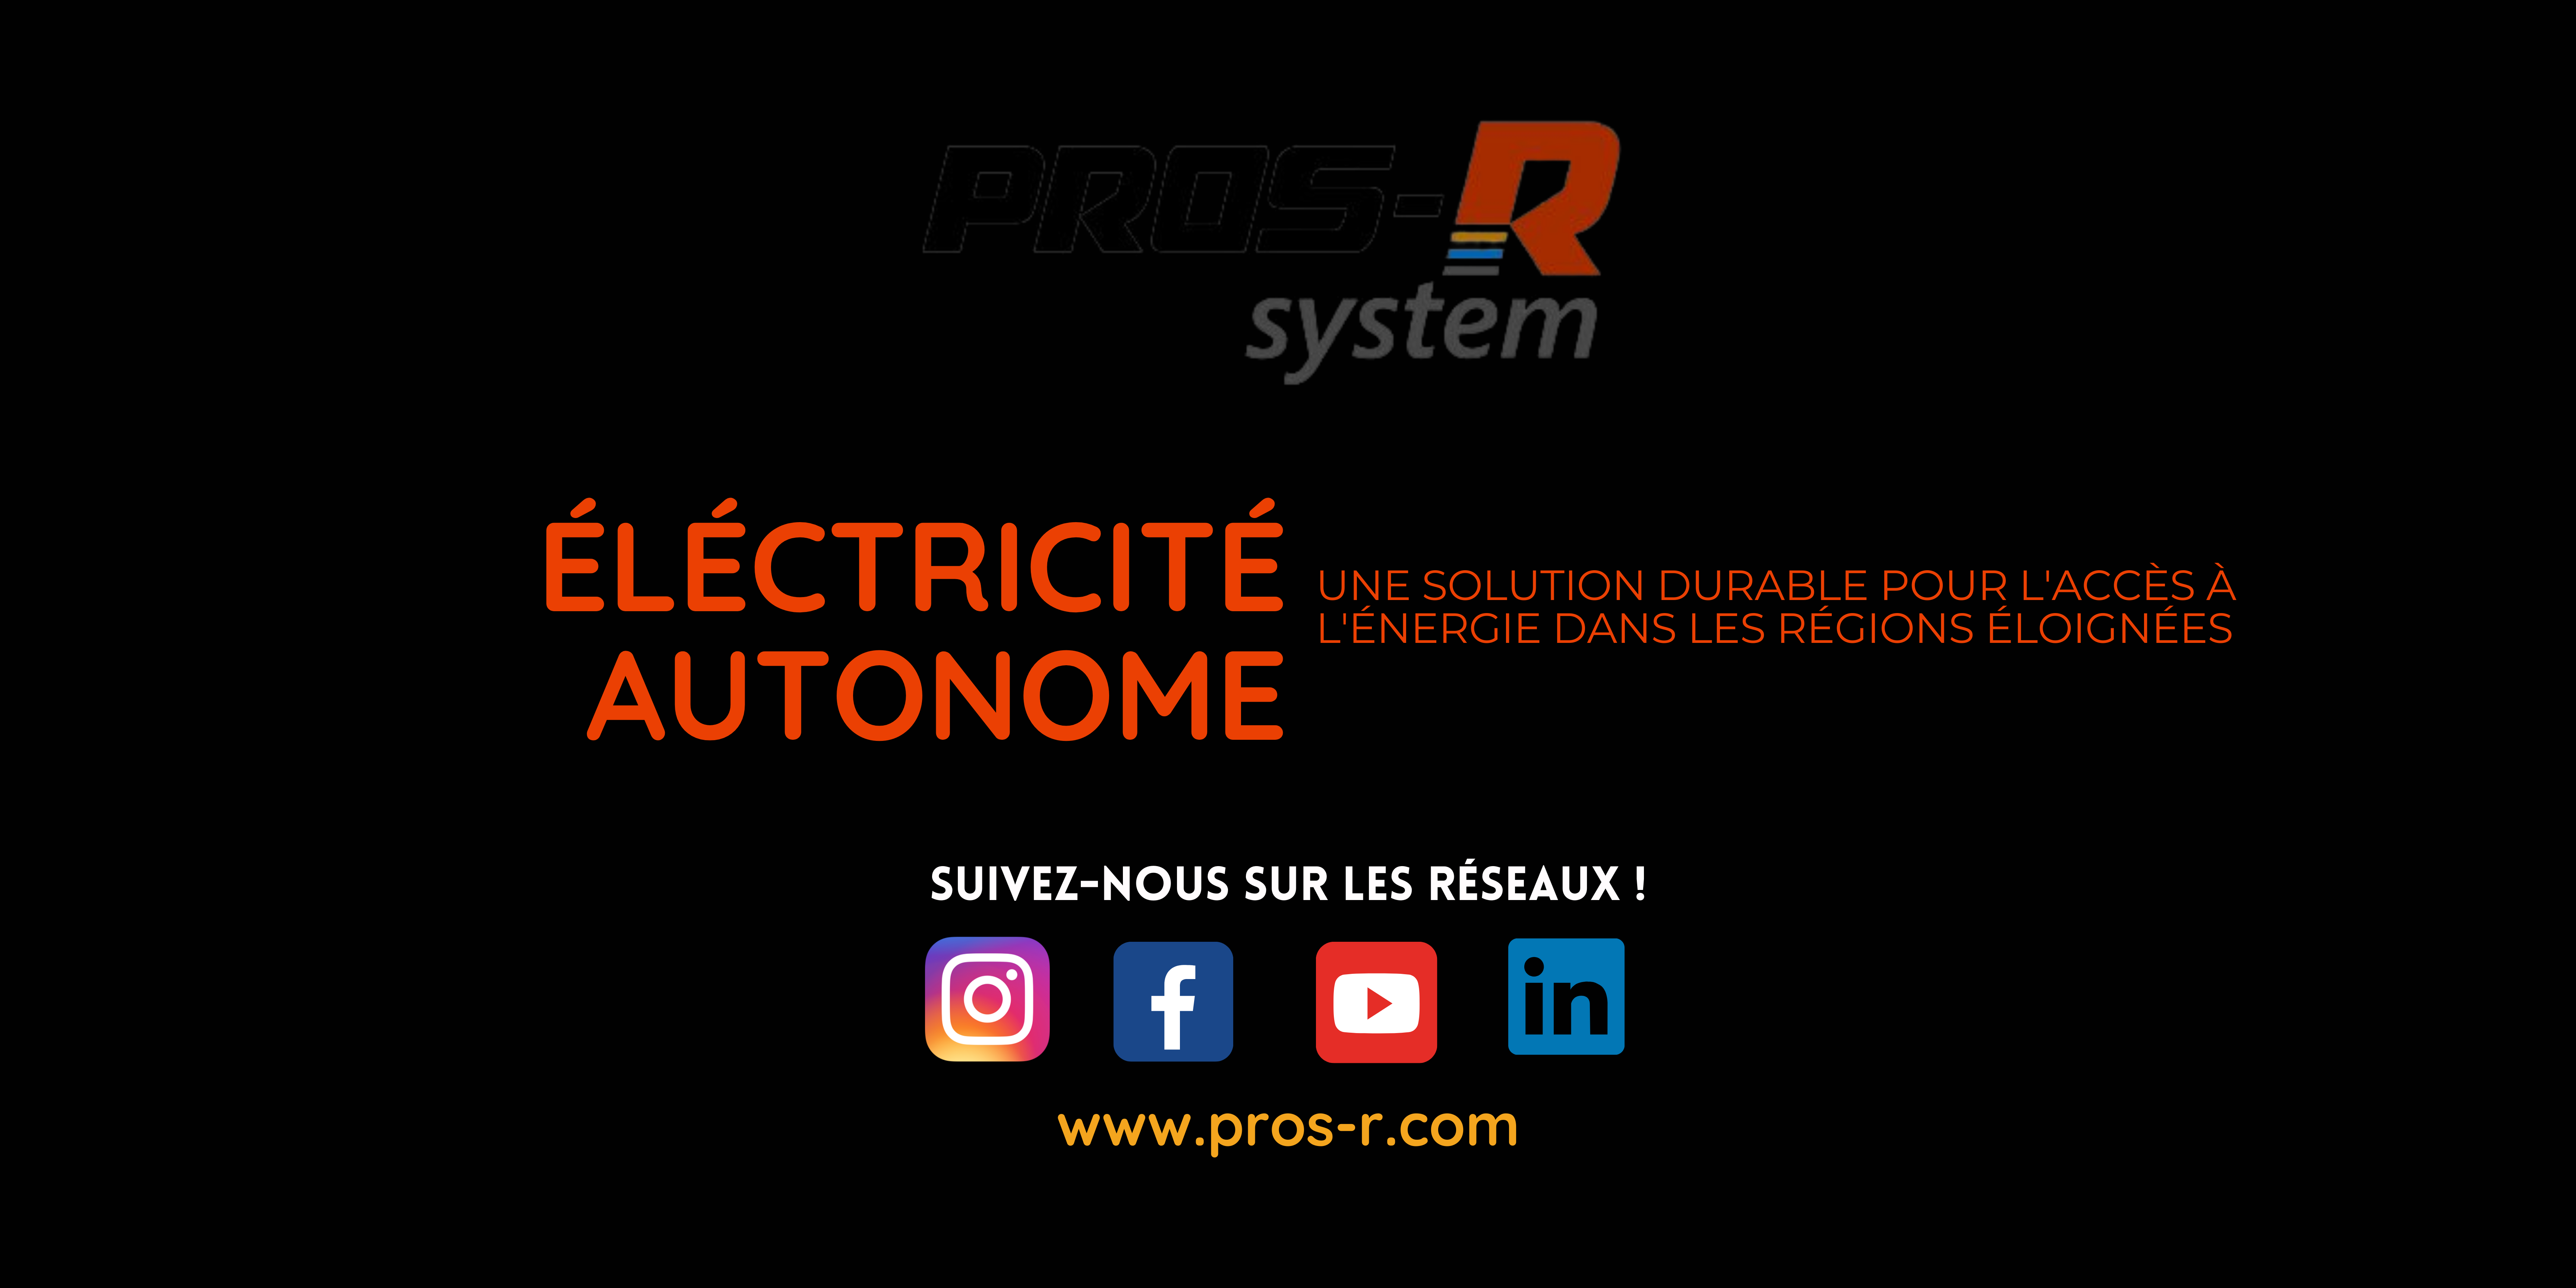 Autonomous electricity, a sustainable solution for remote regions PROS-R System